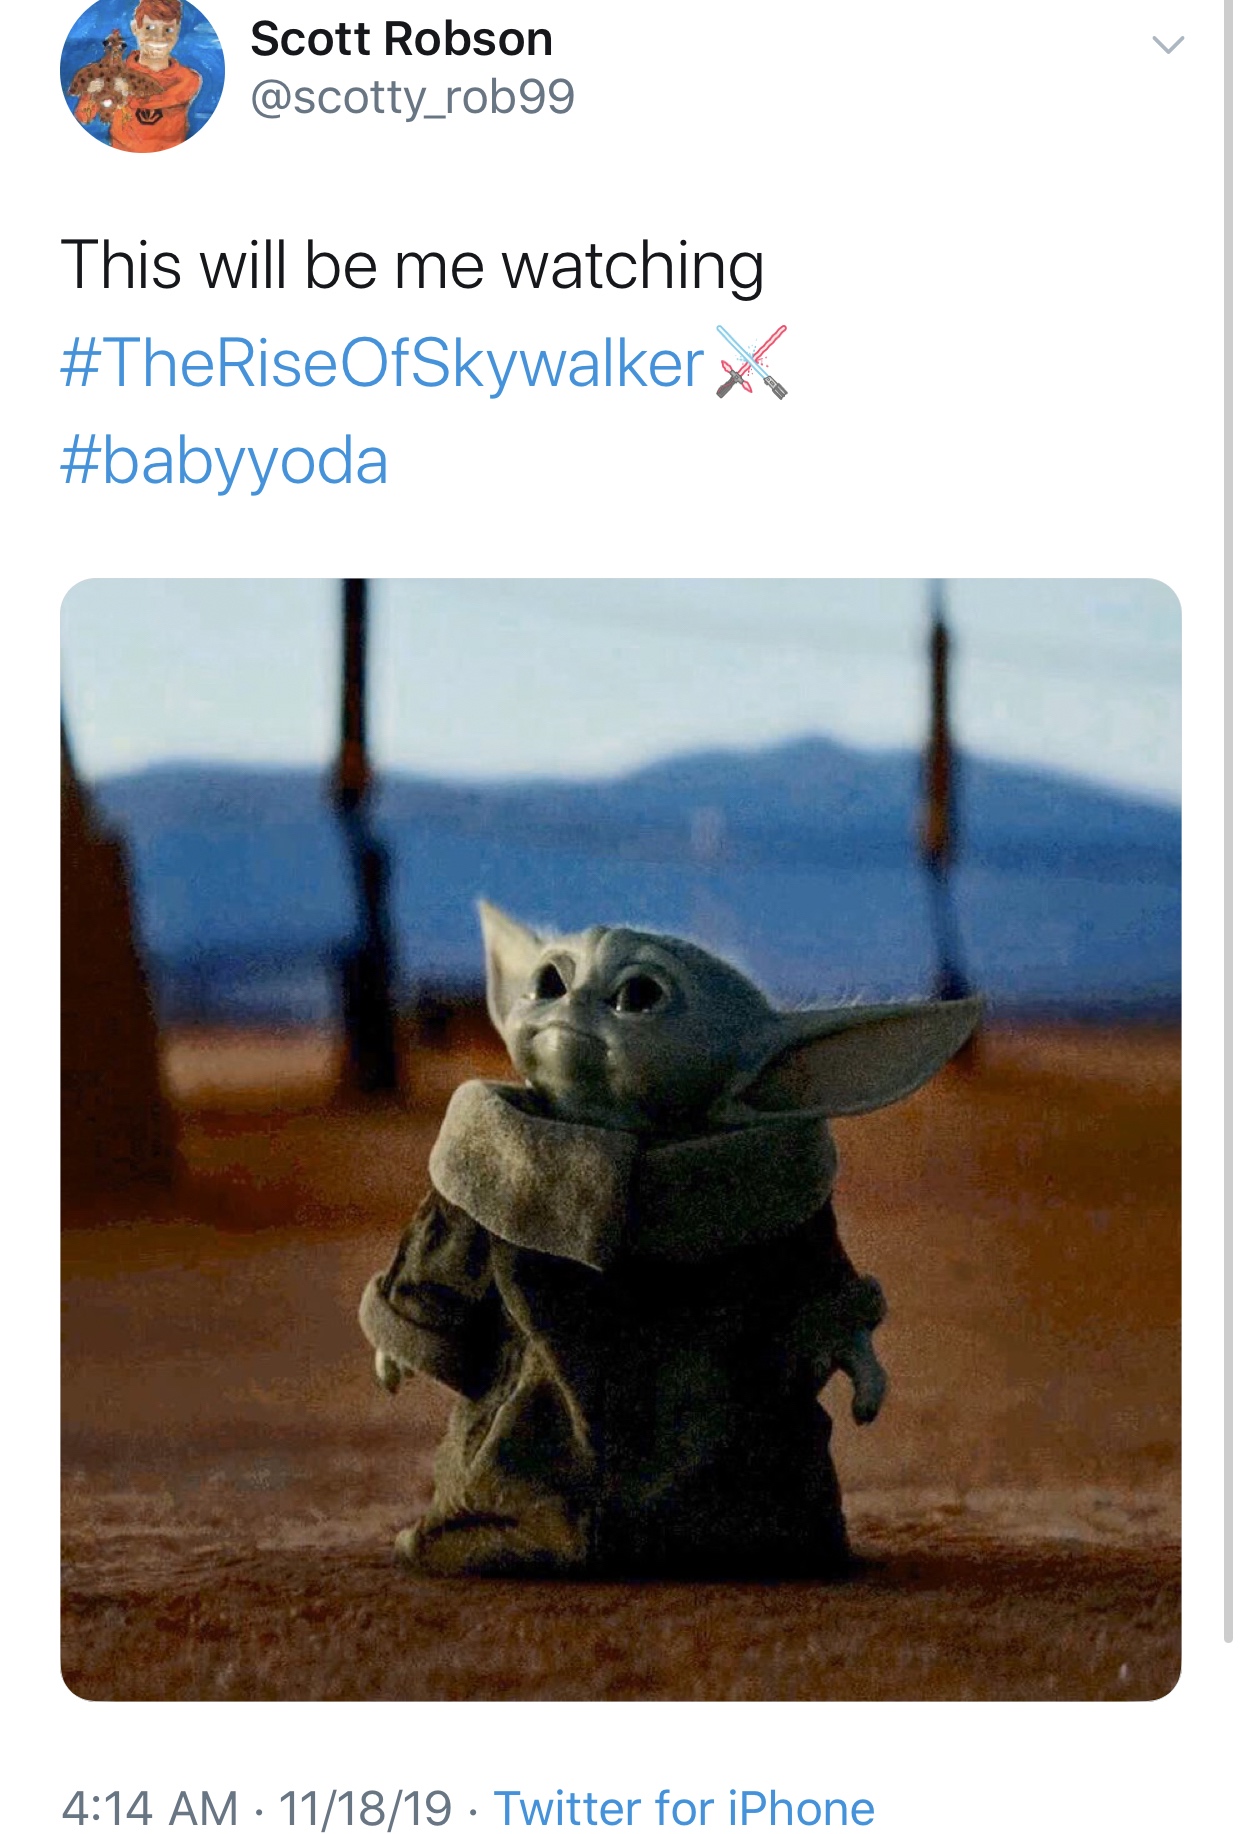 baby yoda meme - Scott Robson This will be me watching OfSkywalker X 111819 Twitter for iPhone